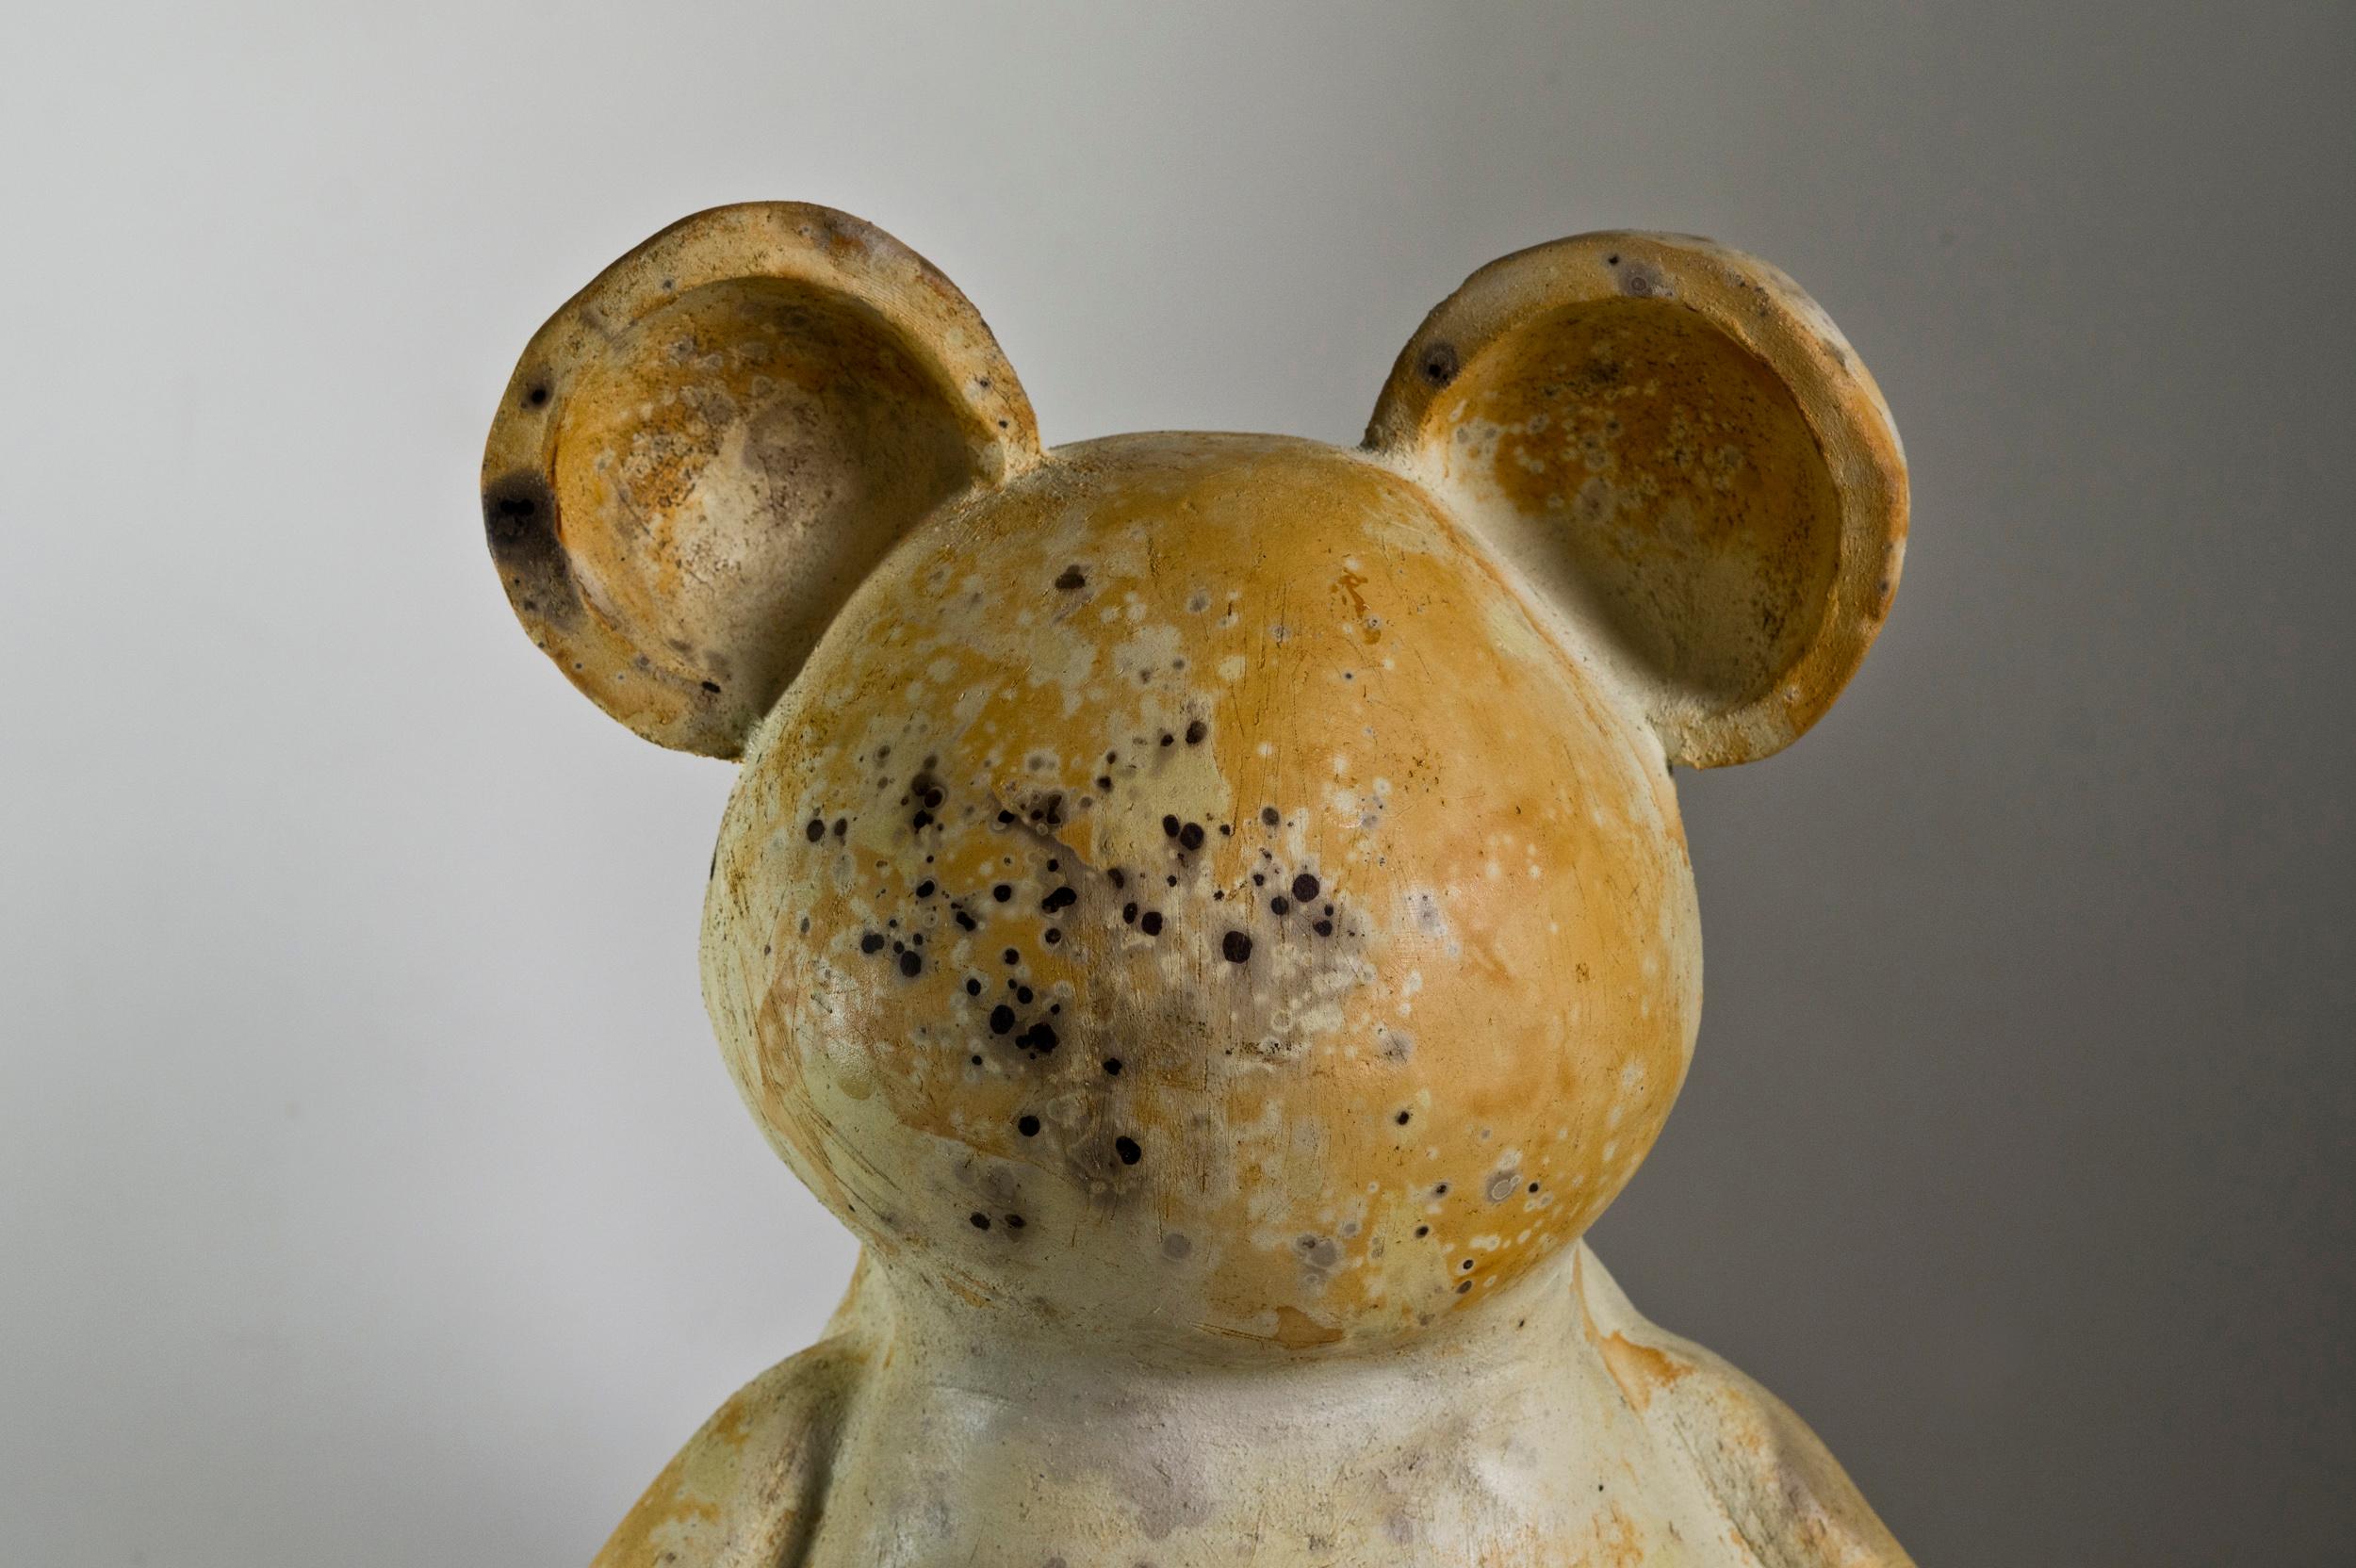 This Teddy has survived the flames.

Agustina Garrigou is a designer and a ceramist. Born in Buenos Aires, Argentina and raised by a family in love with nature and a particular sense of humor. She studied industrial design and then moved to